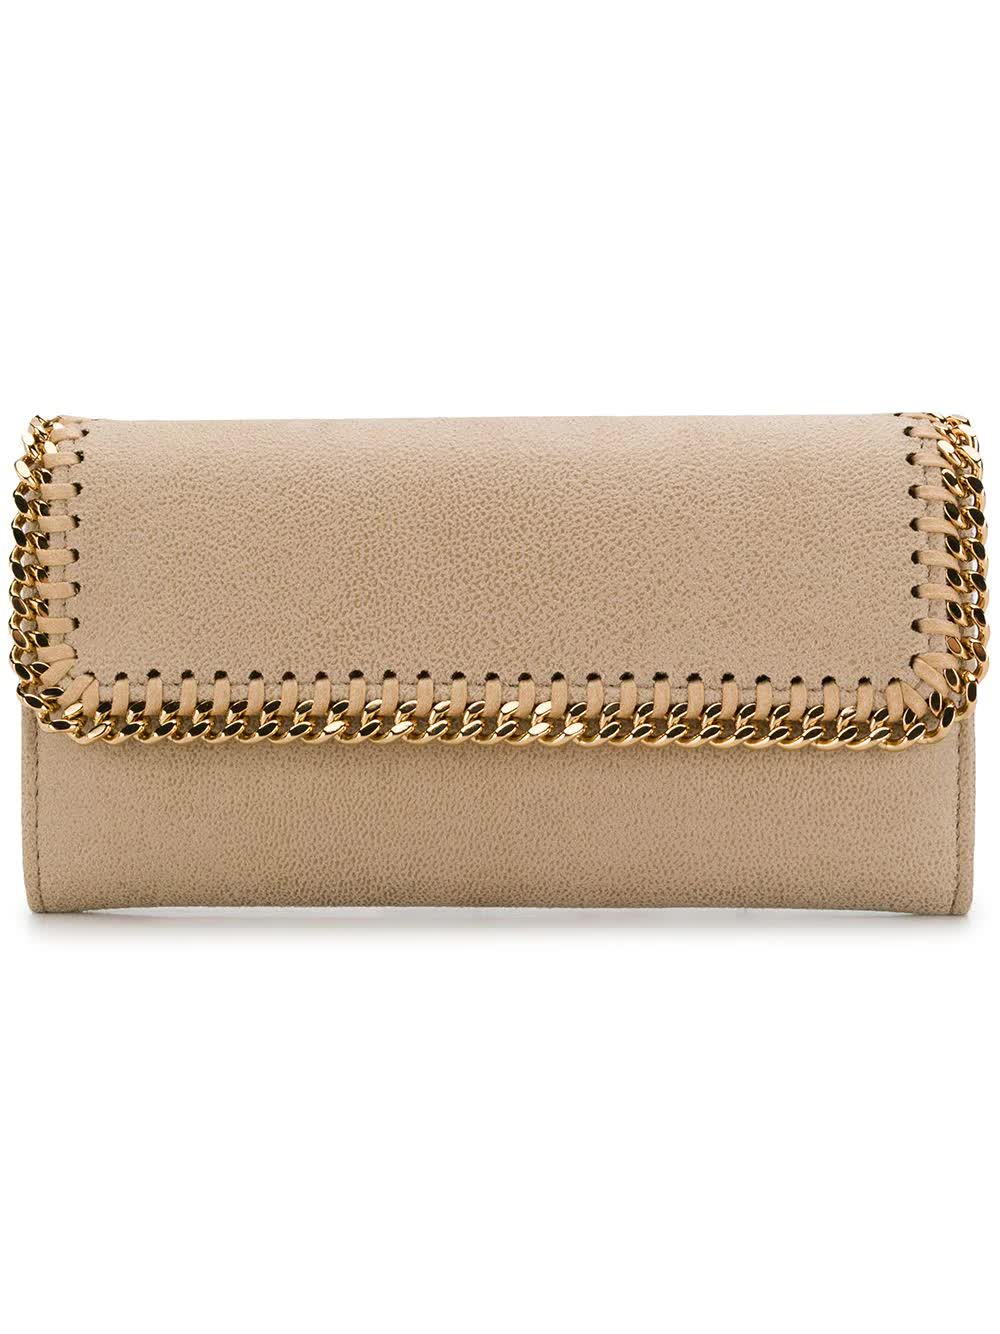 Stella McCartney Beige And Gold Continental Falabella Wallet